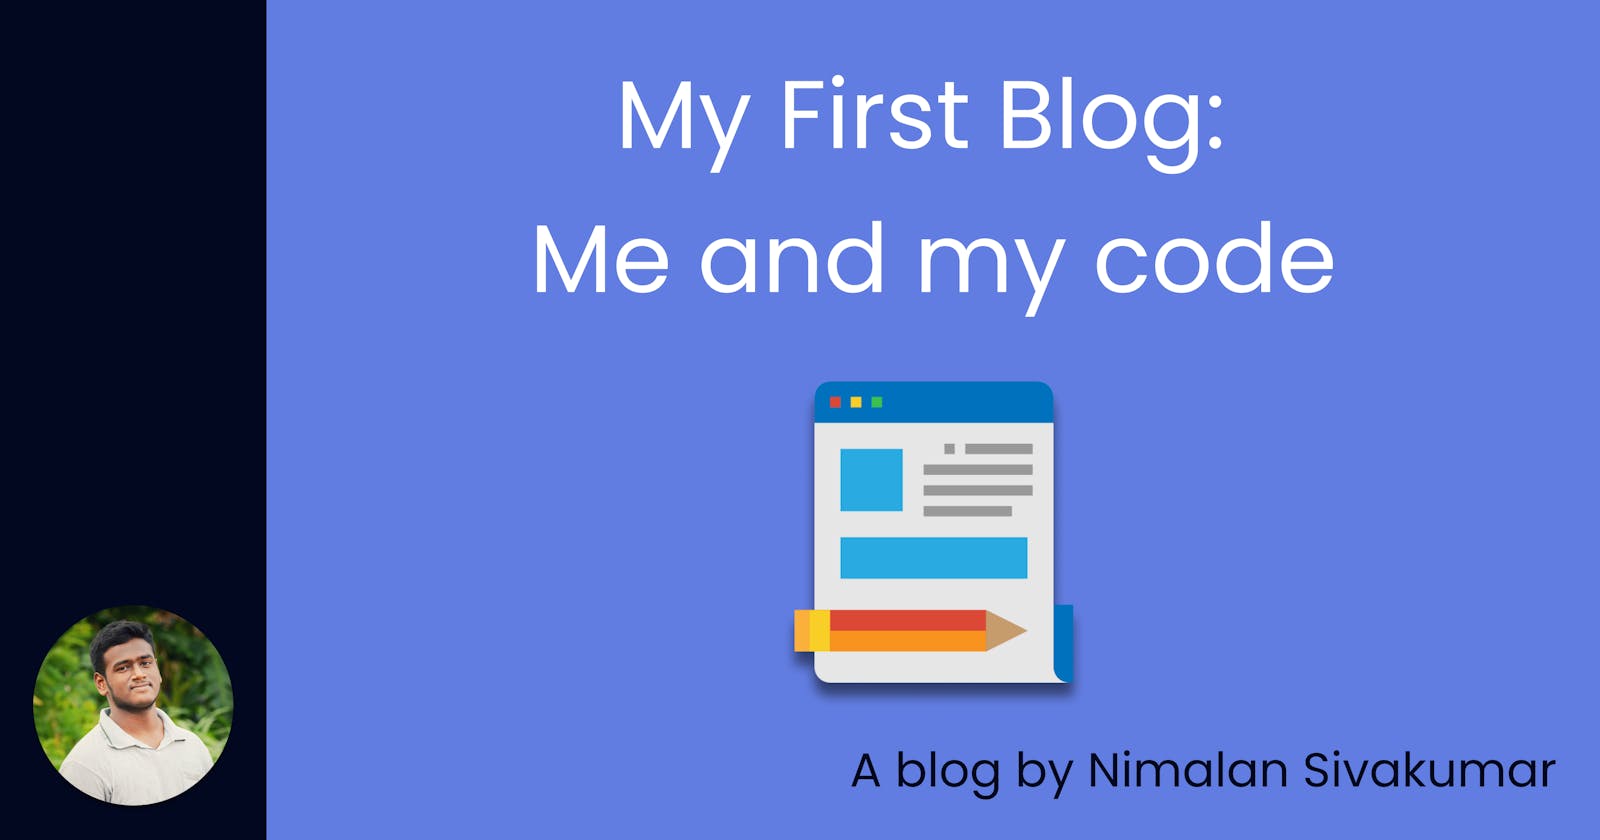 My First Blog: Me and my code